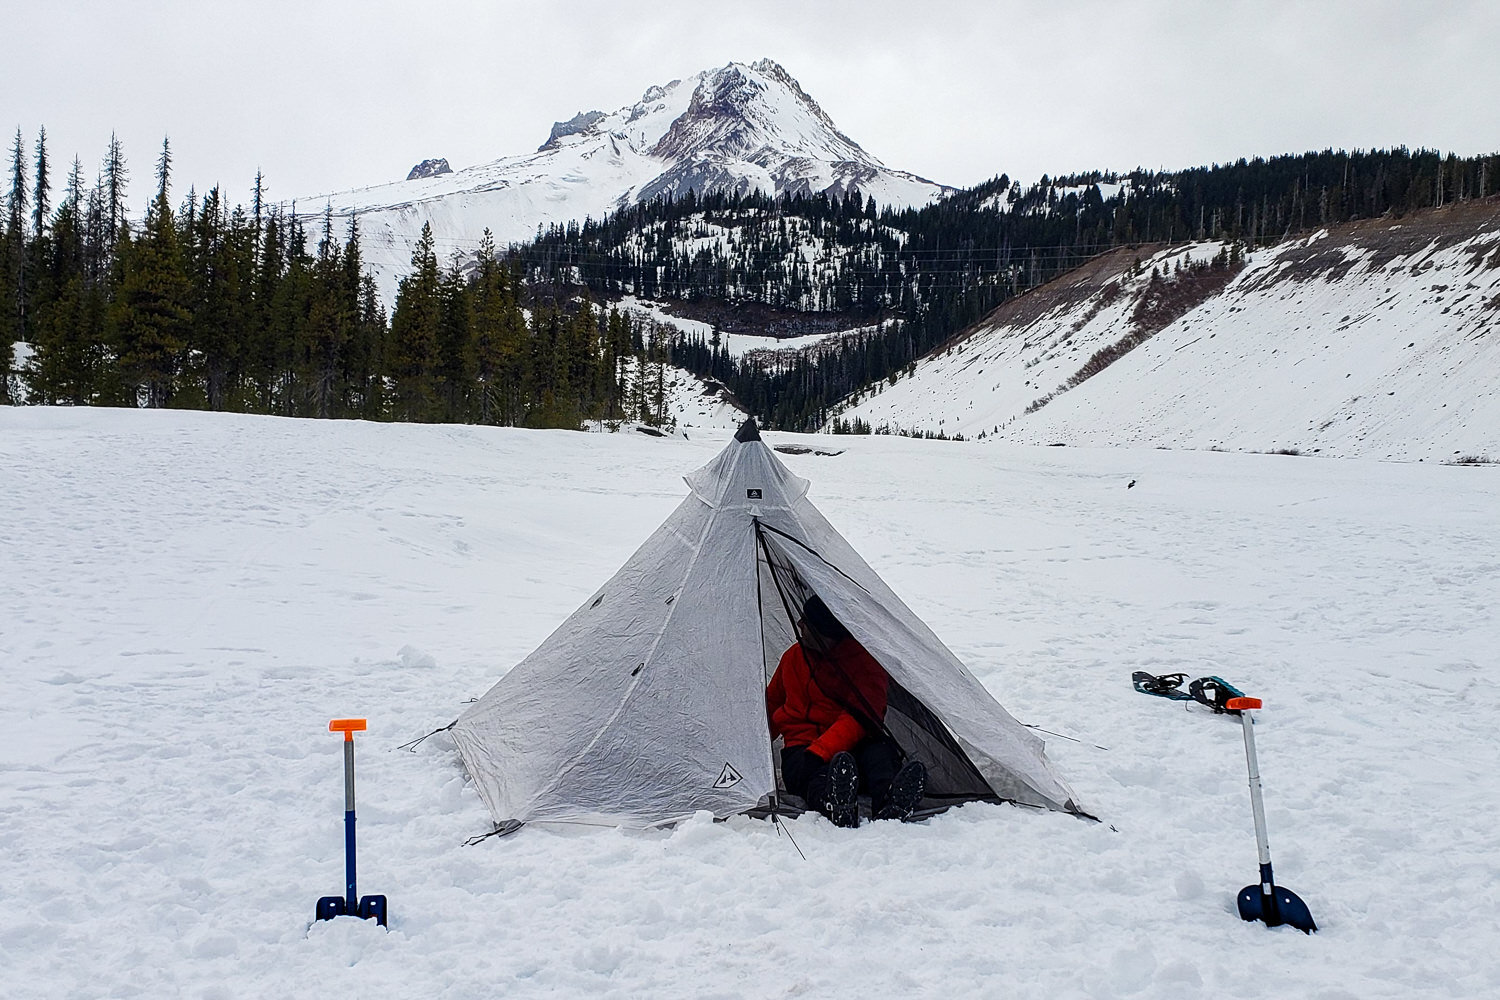 The Hyperlite Mountain Gear Ultamid 2 is the only 4-season tent on our list, and it provides the best weather protection of any ultralight tent we’ve tested.